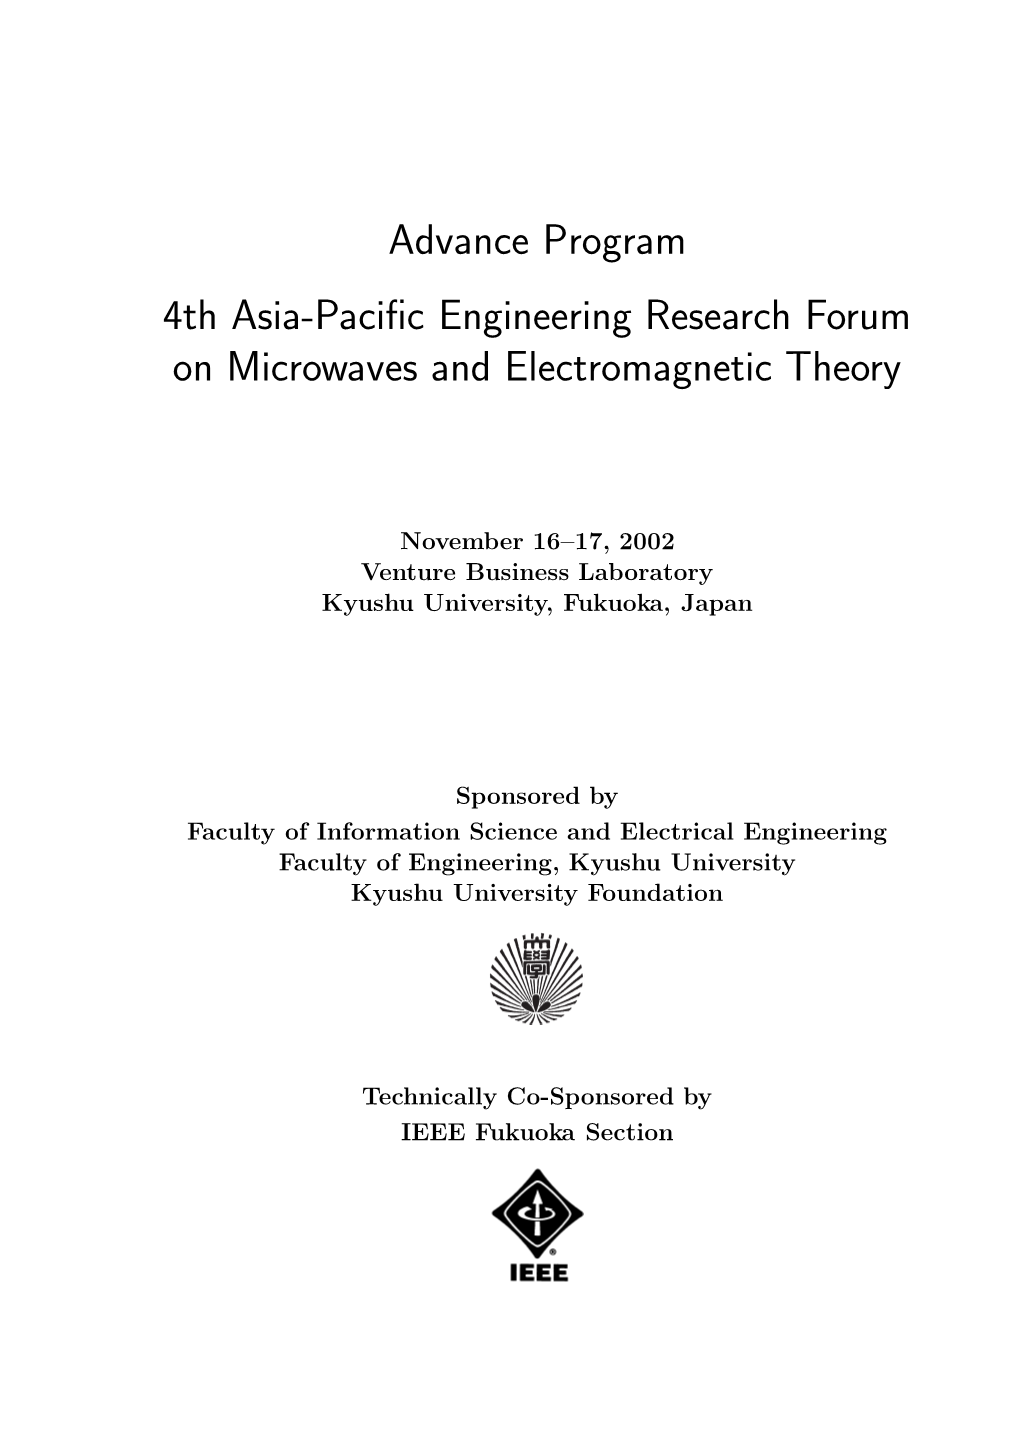 Advance Program 4Th Asia-Pacific Engineering Research Forum On